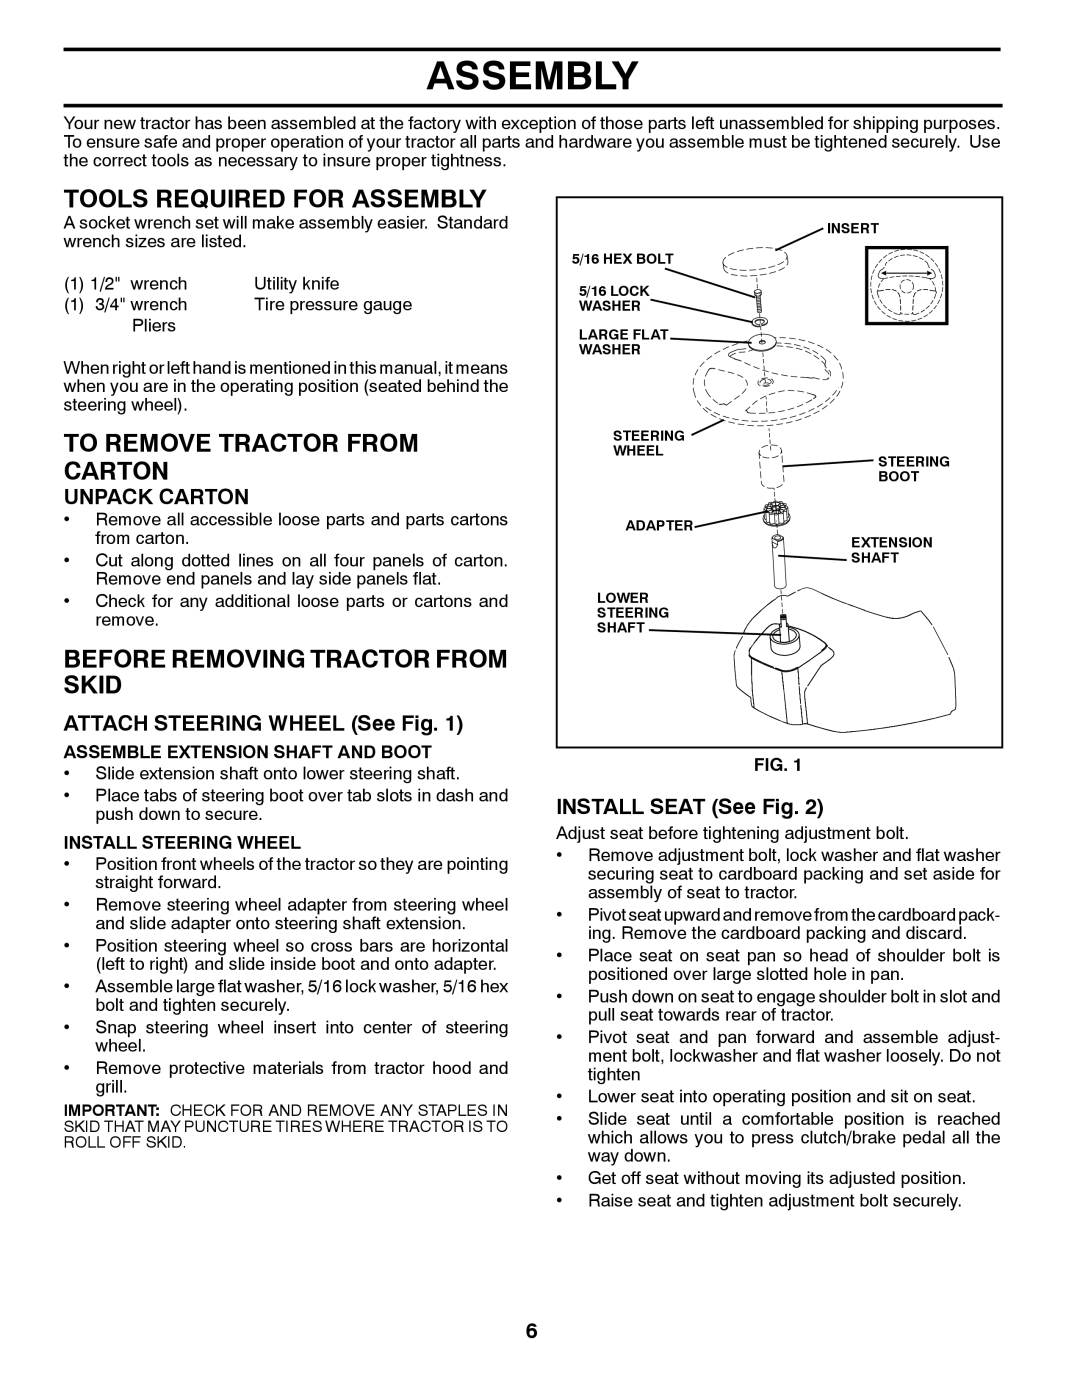 Poulan PO18542LT manual Tools Required For Assembly, To Remove Tractor From Carton, Before Removing Tractor From Skid 